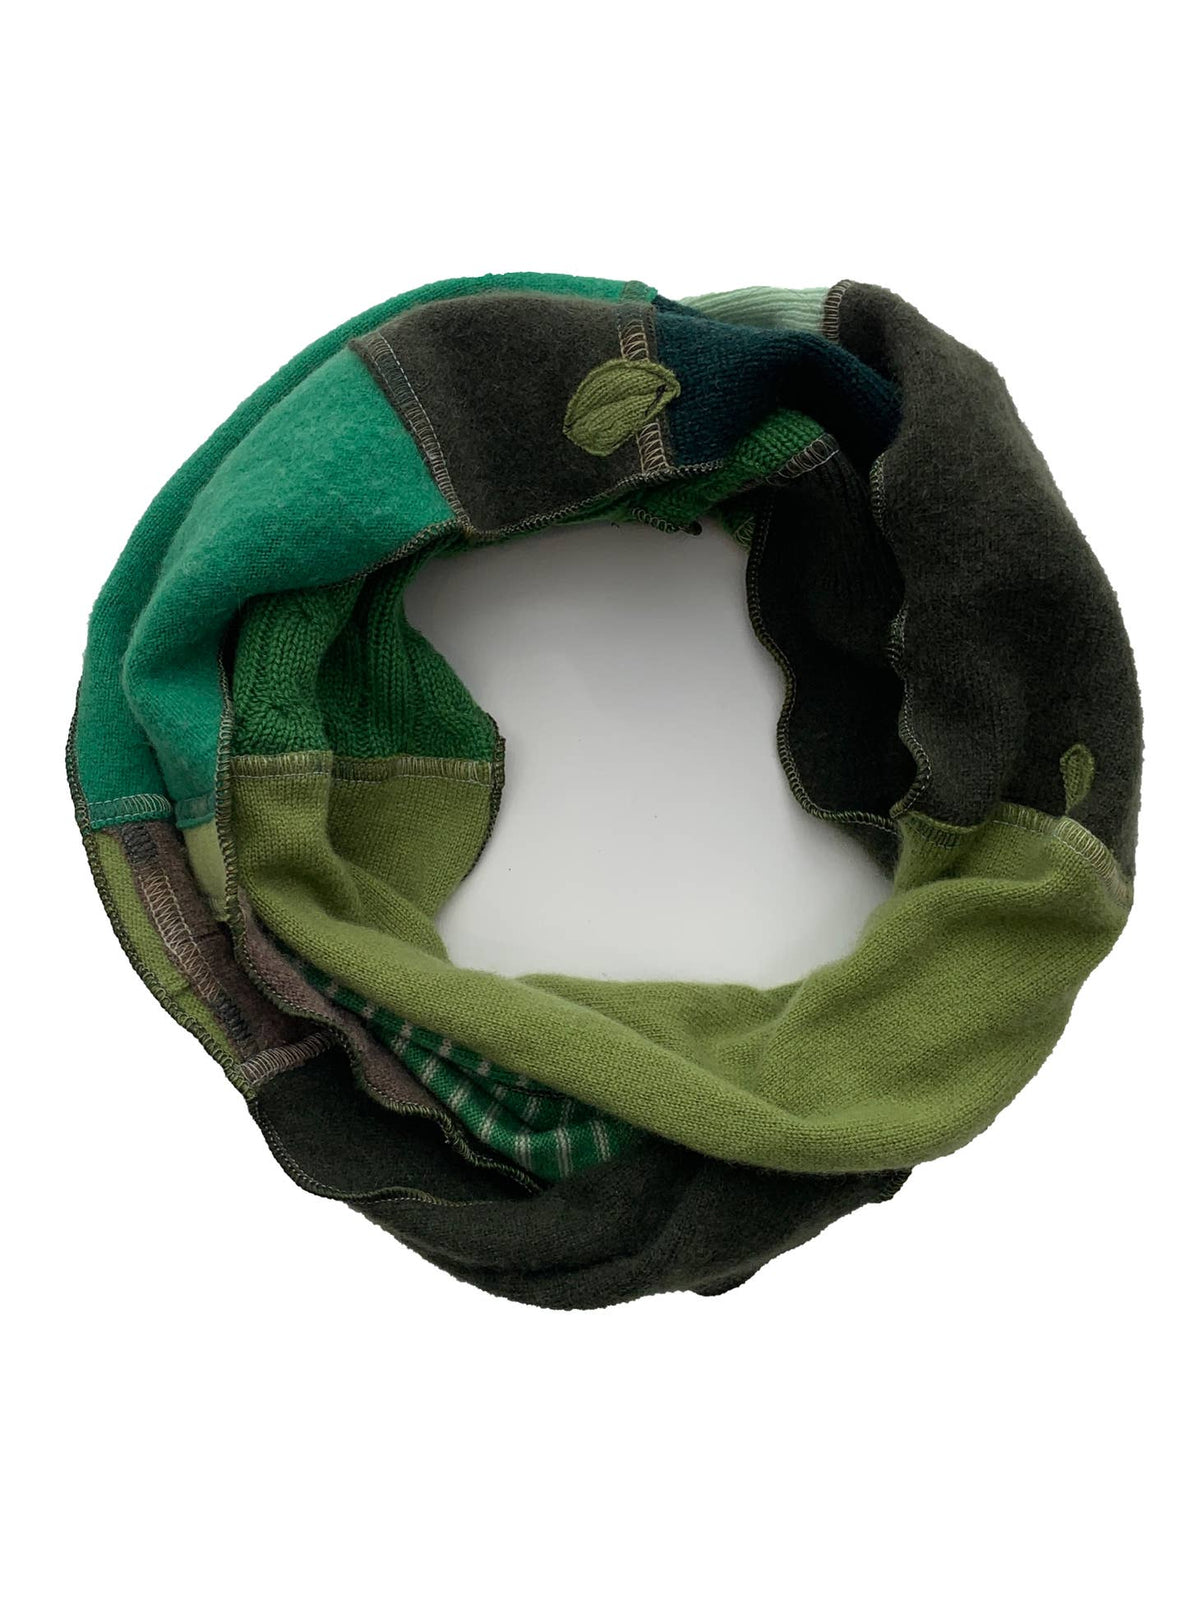 Cashmere Infinity Scarf :: A Rainbow of Colors Available